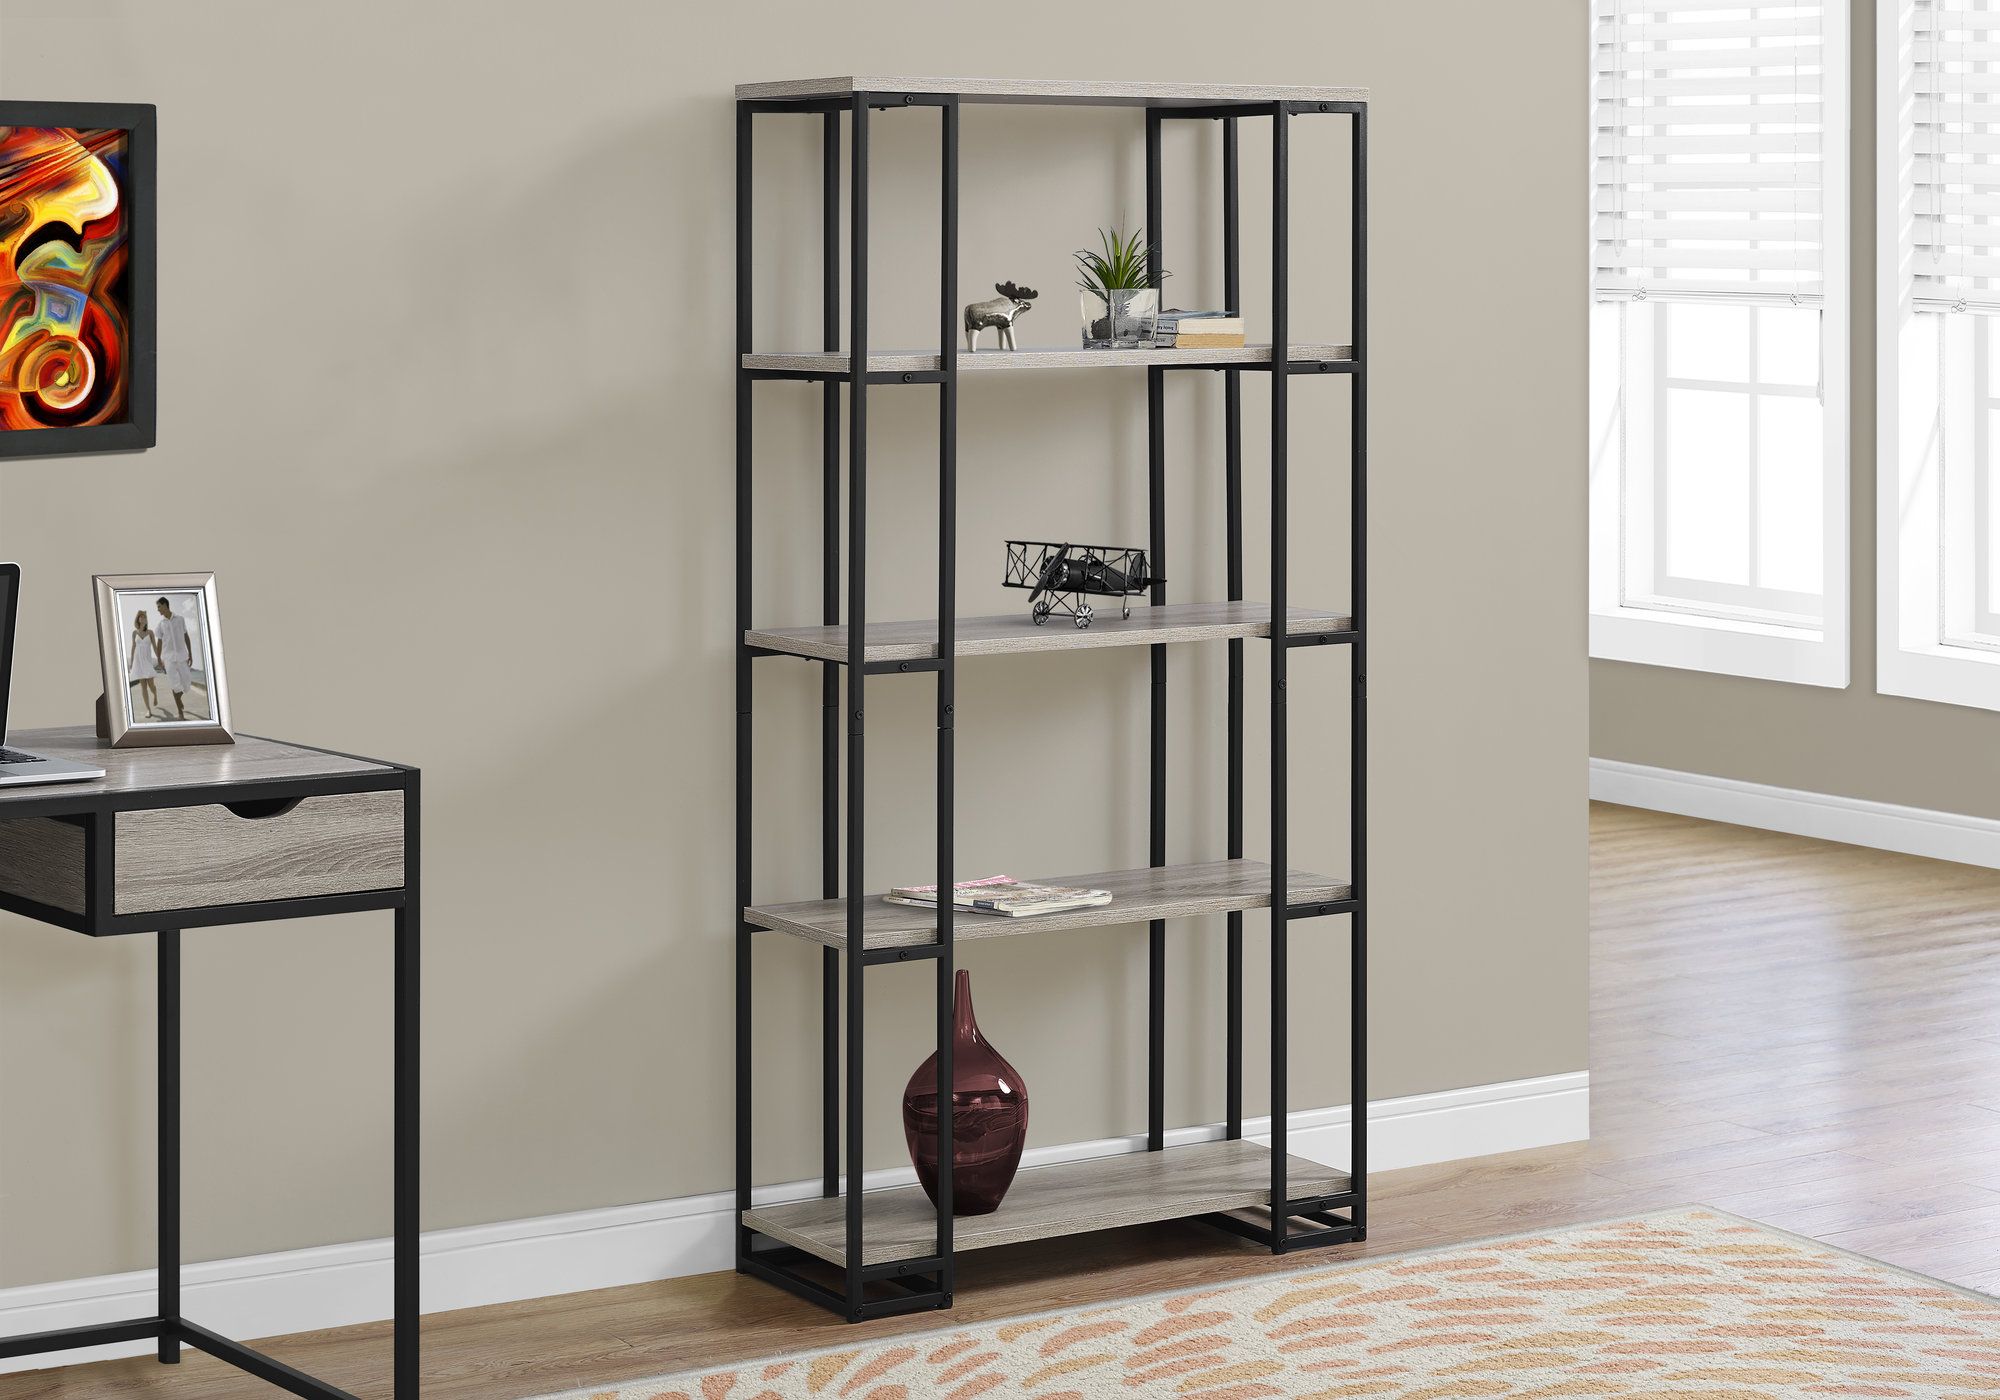 I 7241 - BOOKCASE - 60"H / DARK TAUPE / BLACK METAL BY MONARCH SPECIALTIES INC